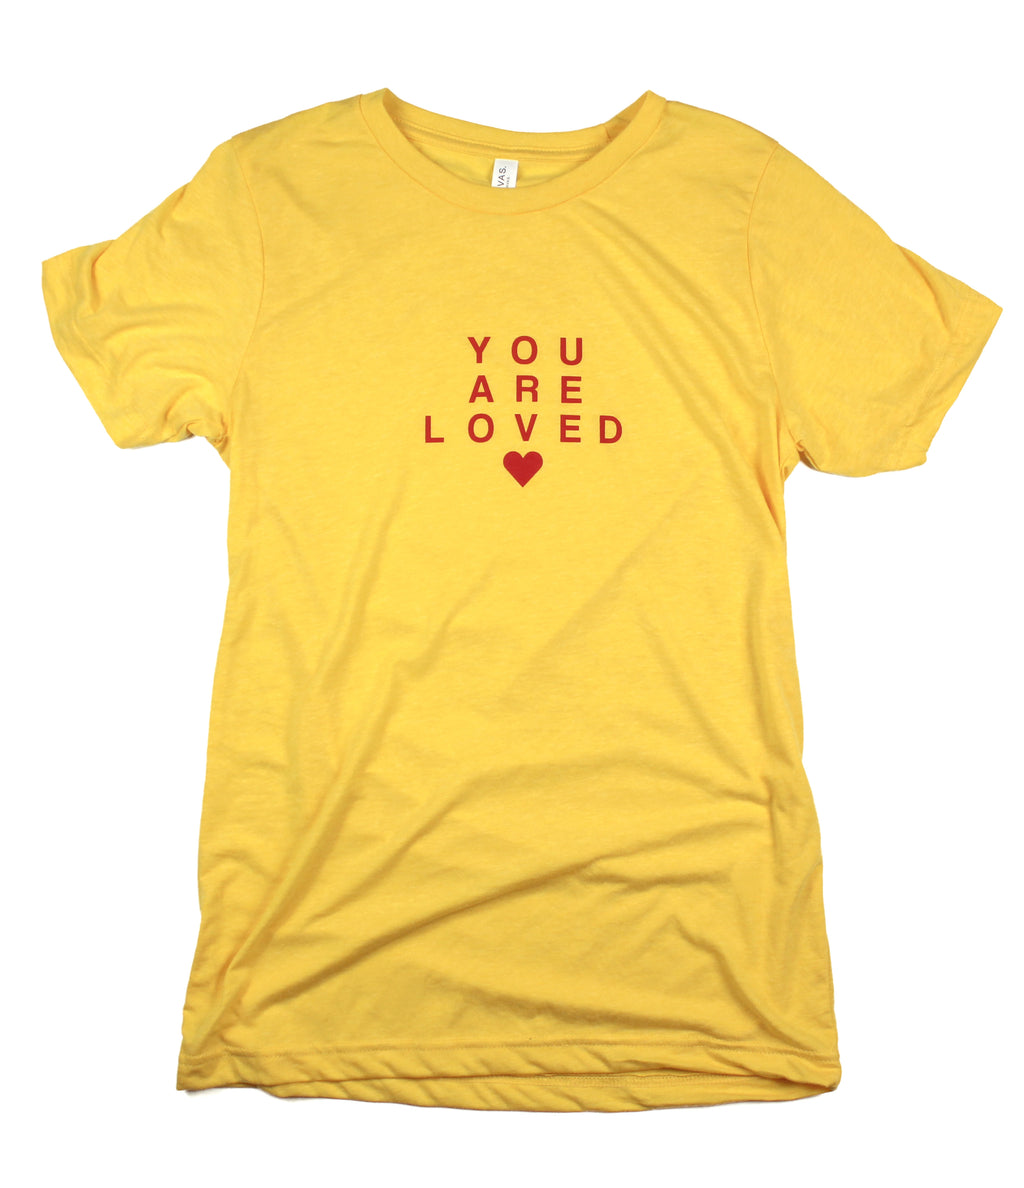 YOU ARE LOVED YELLOW GOLD RED LETTER T-SHIRT